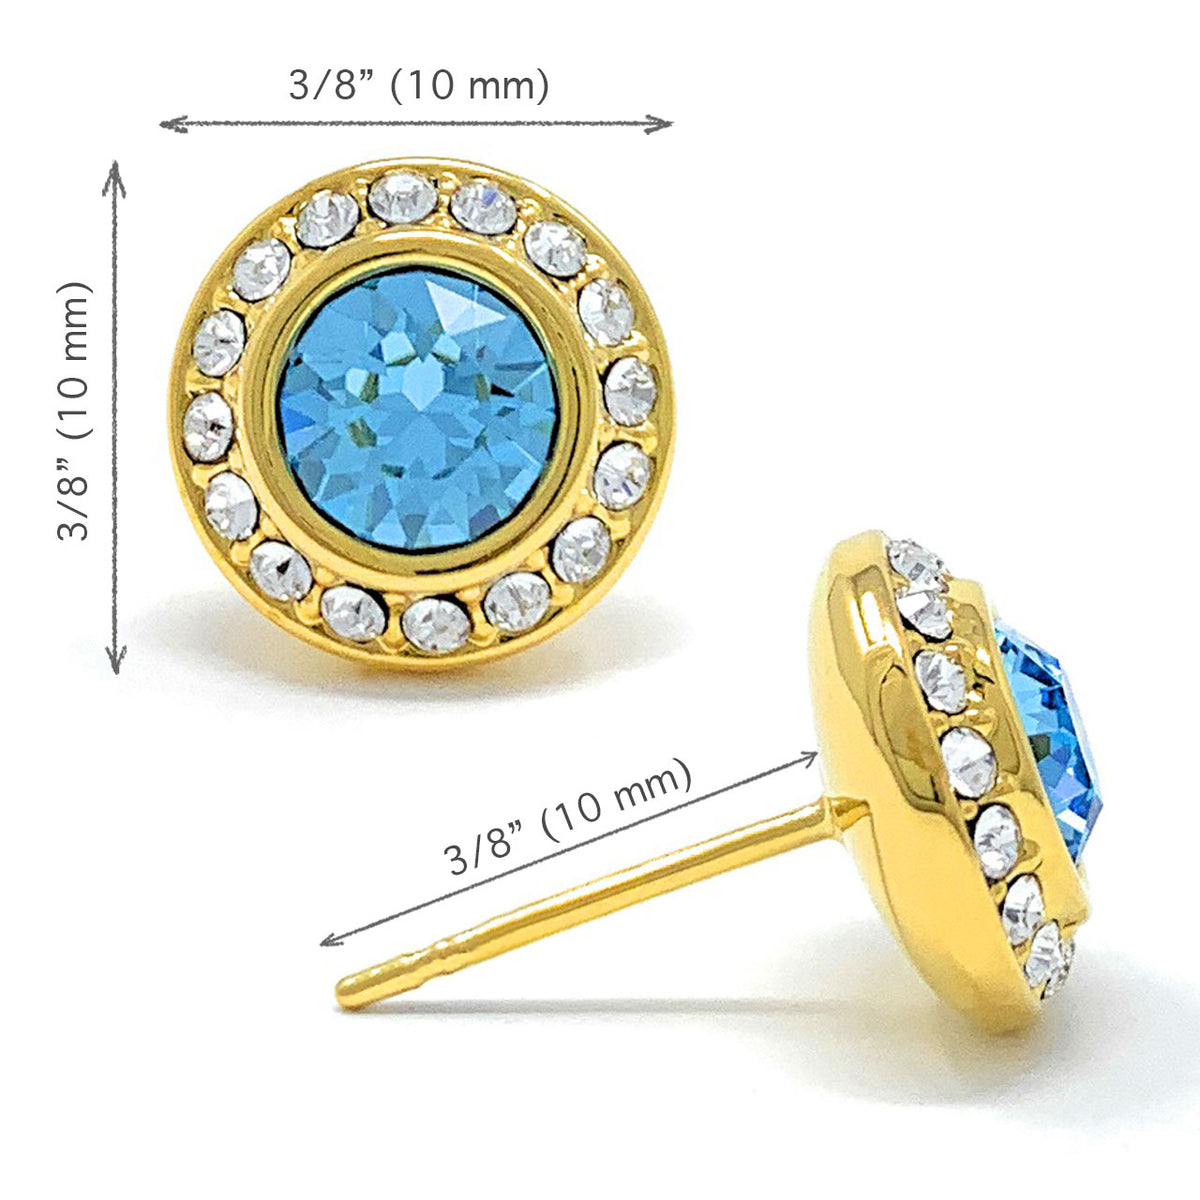 Halo Pave Stud Earrings with Blue Aquamarine Round Crystals from Swarovski Gold Plated - Ed Heart